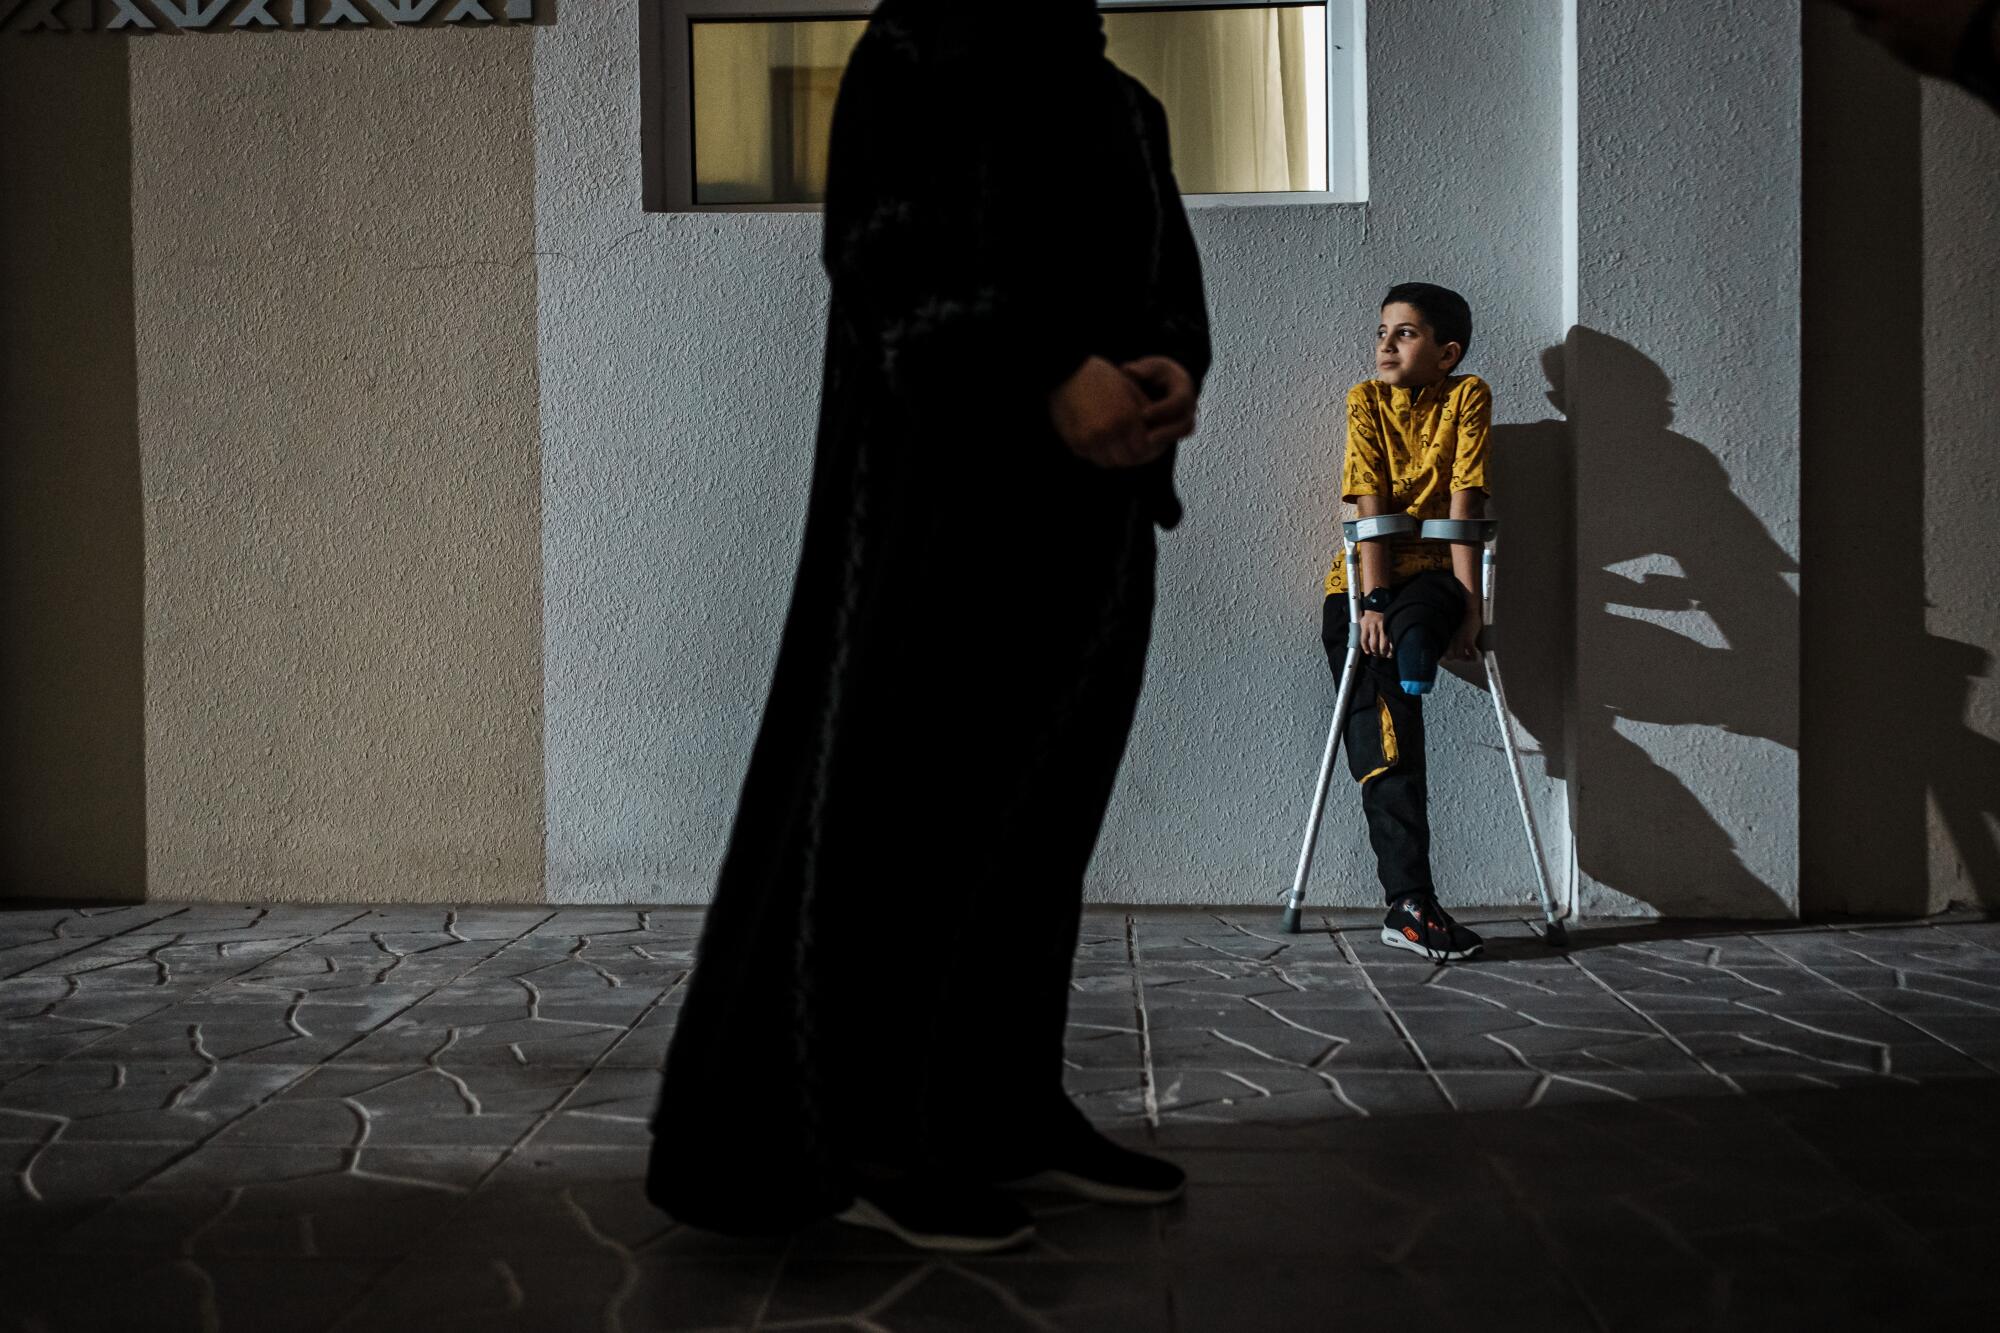 A child with one leg leans on crutches, his shadow falling against a wall, as an adult stands in the foreground.